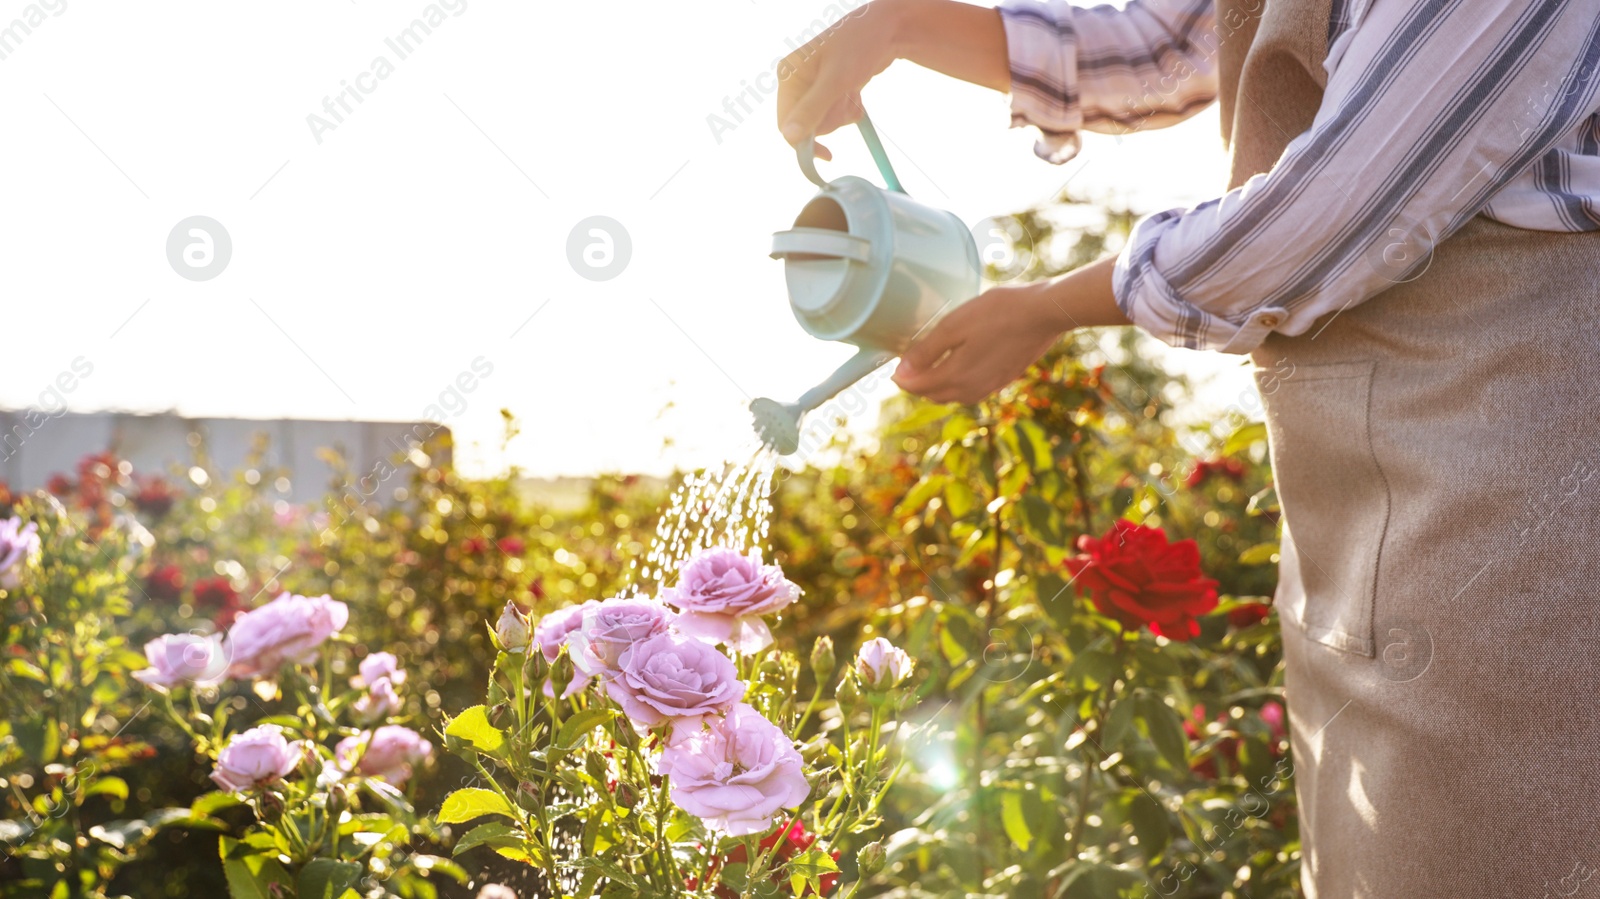 Photo of Closeup view of woman watering rose bushes outdoors. Gardening tool